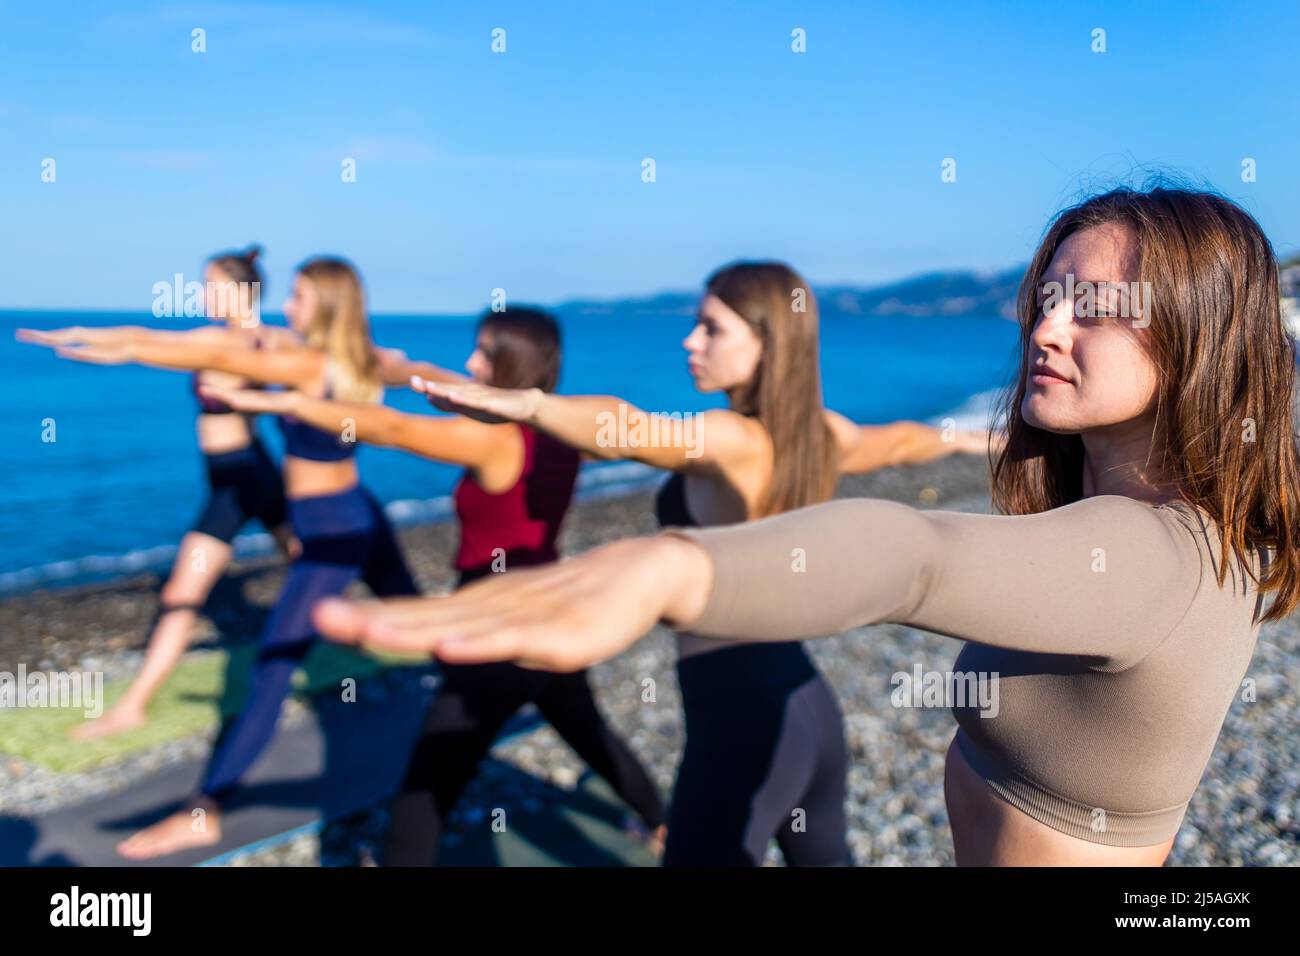 unity group of women practic yoga on rhe beach in morning Stock Photo